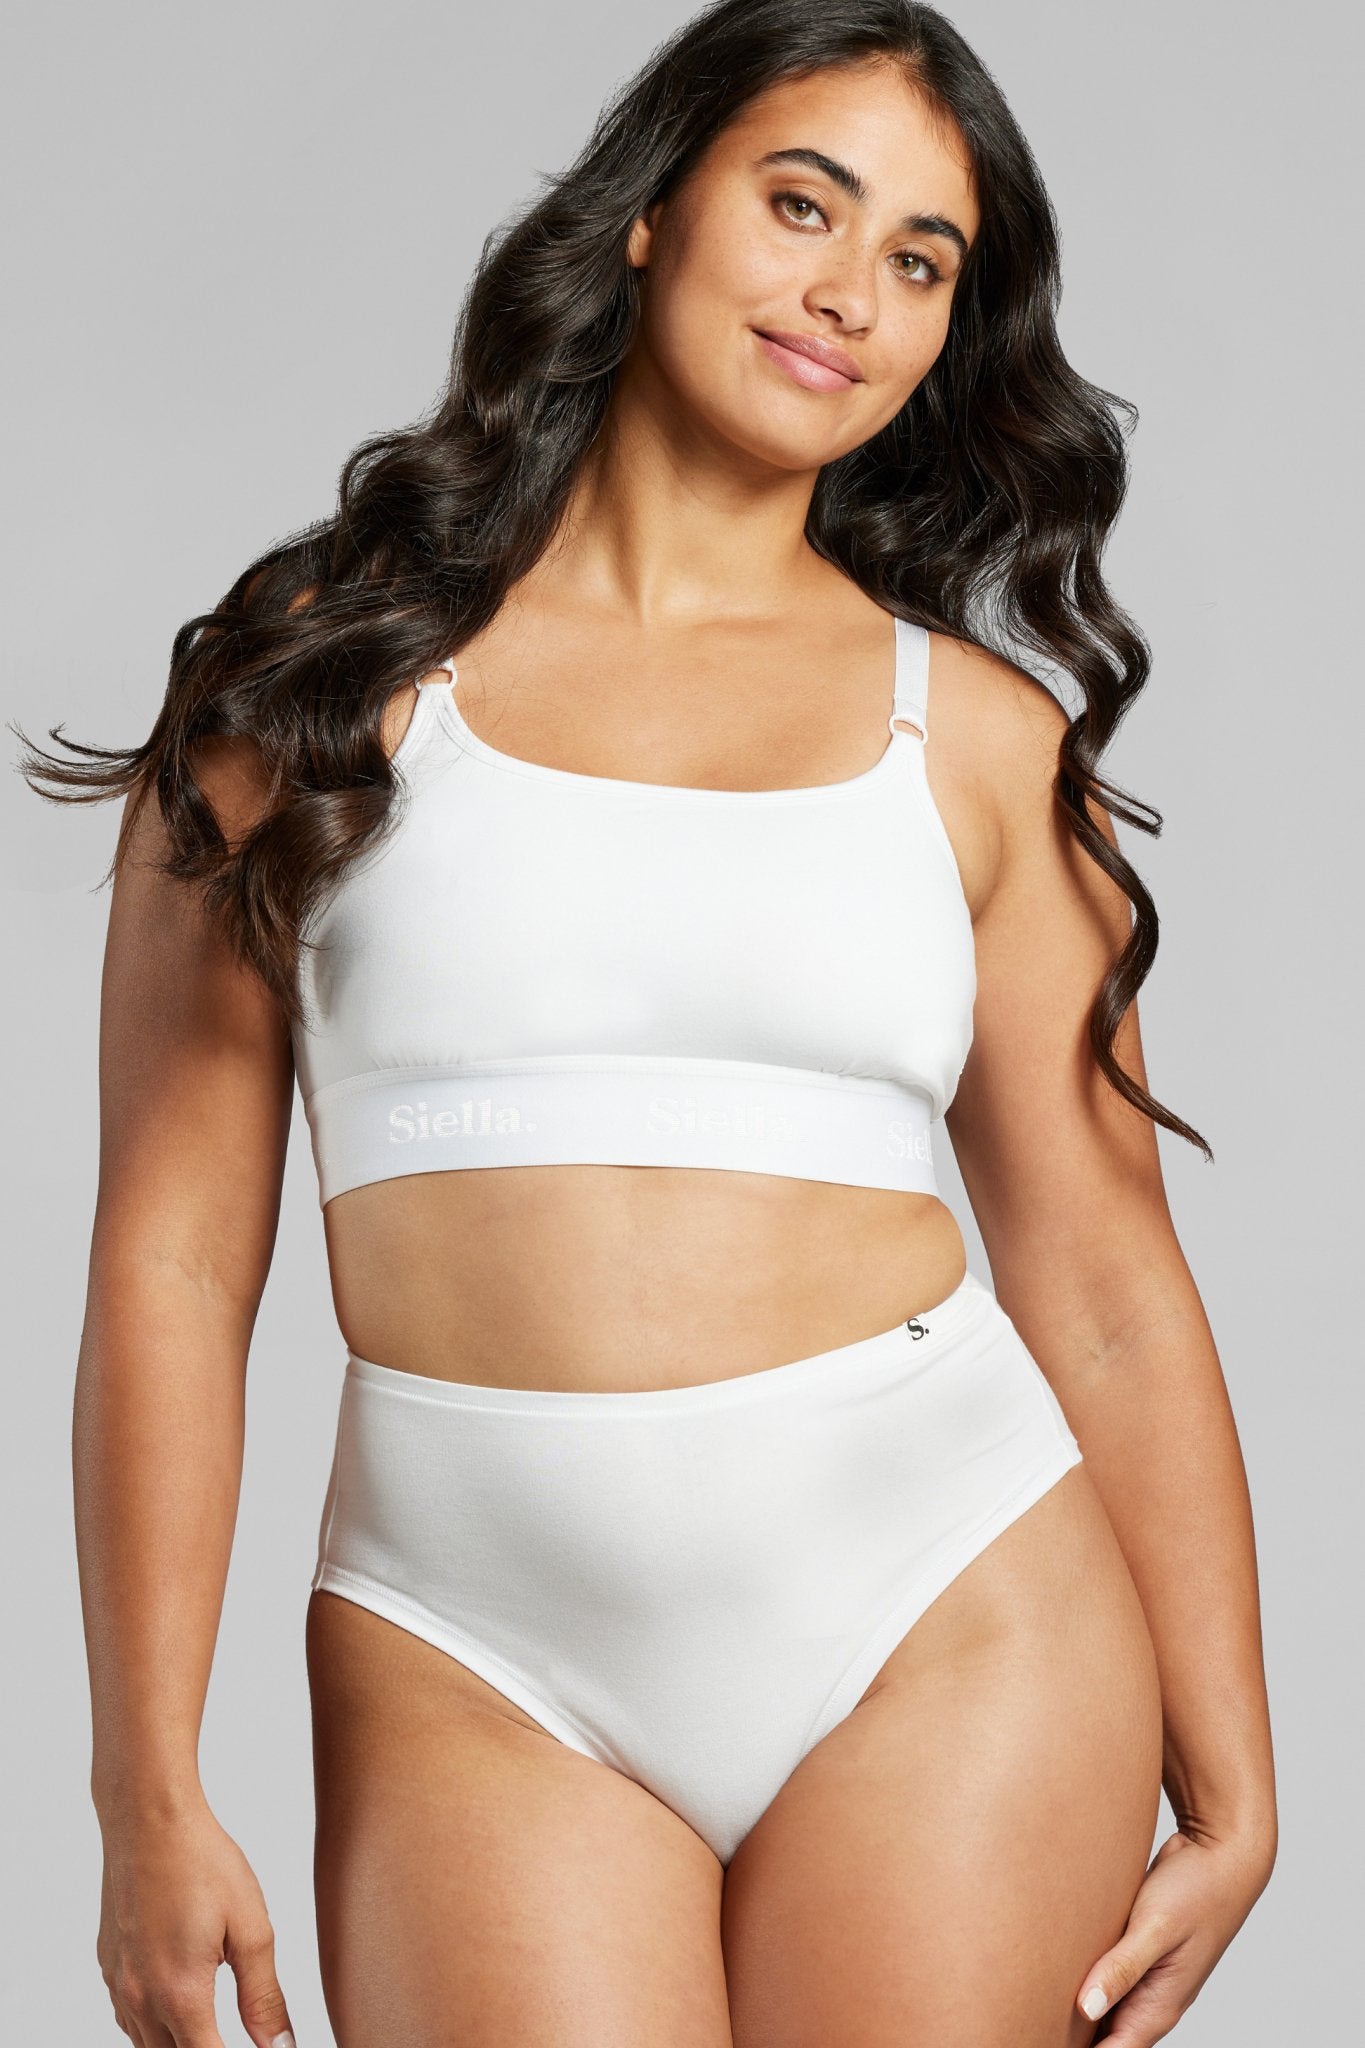 Cotton:On cotton scoop bralette and briefs set in gray